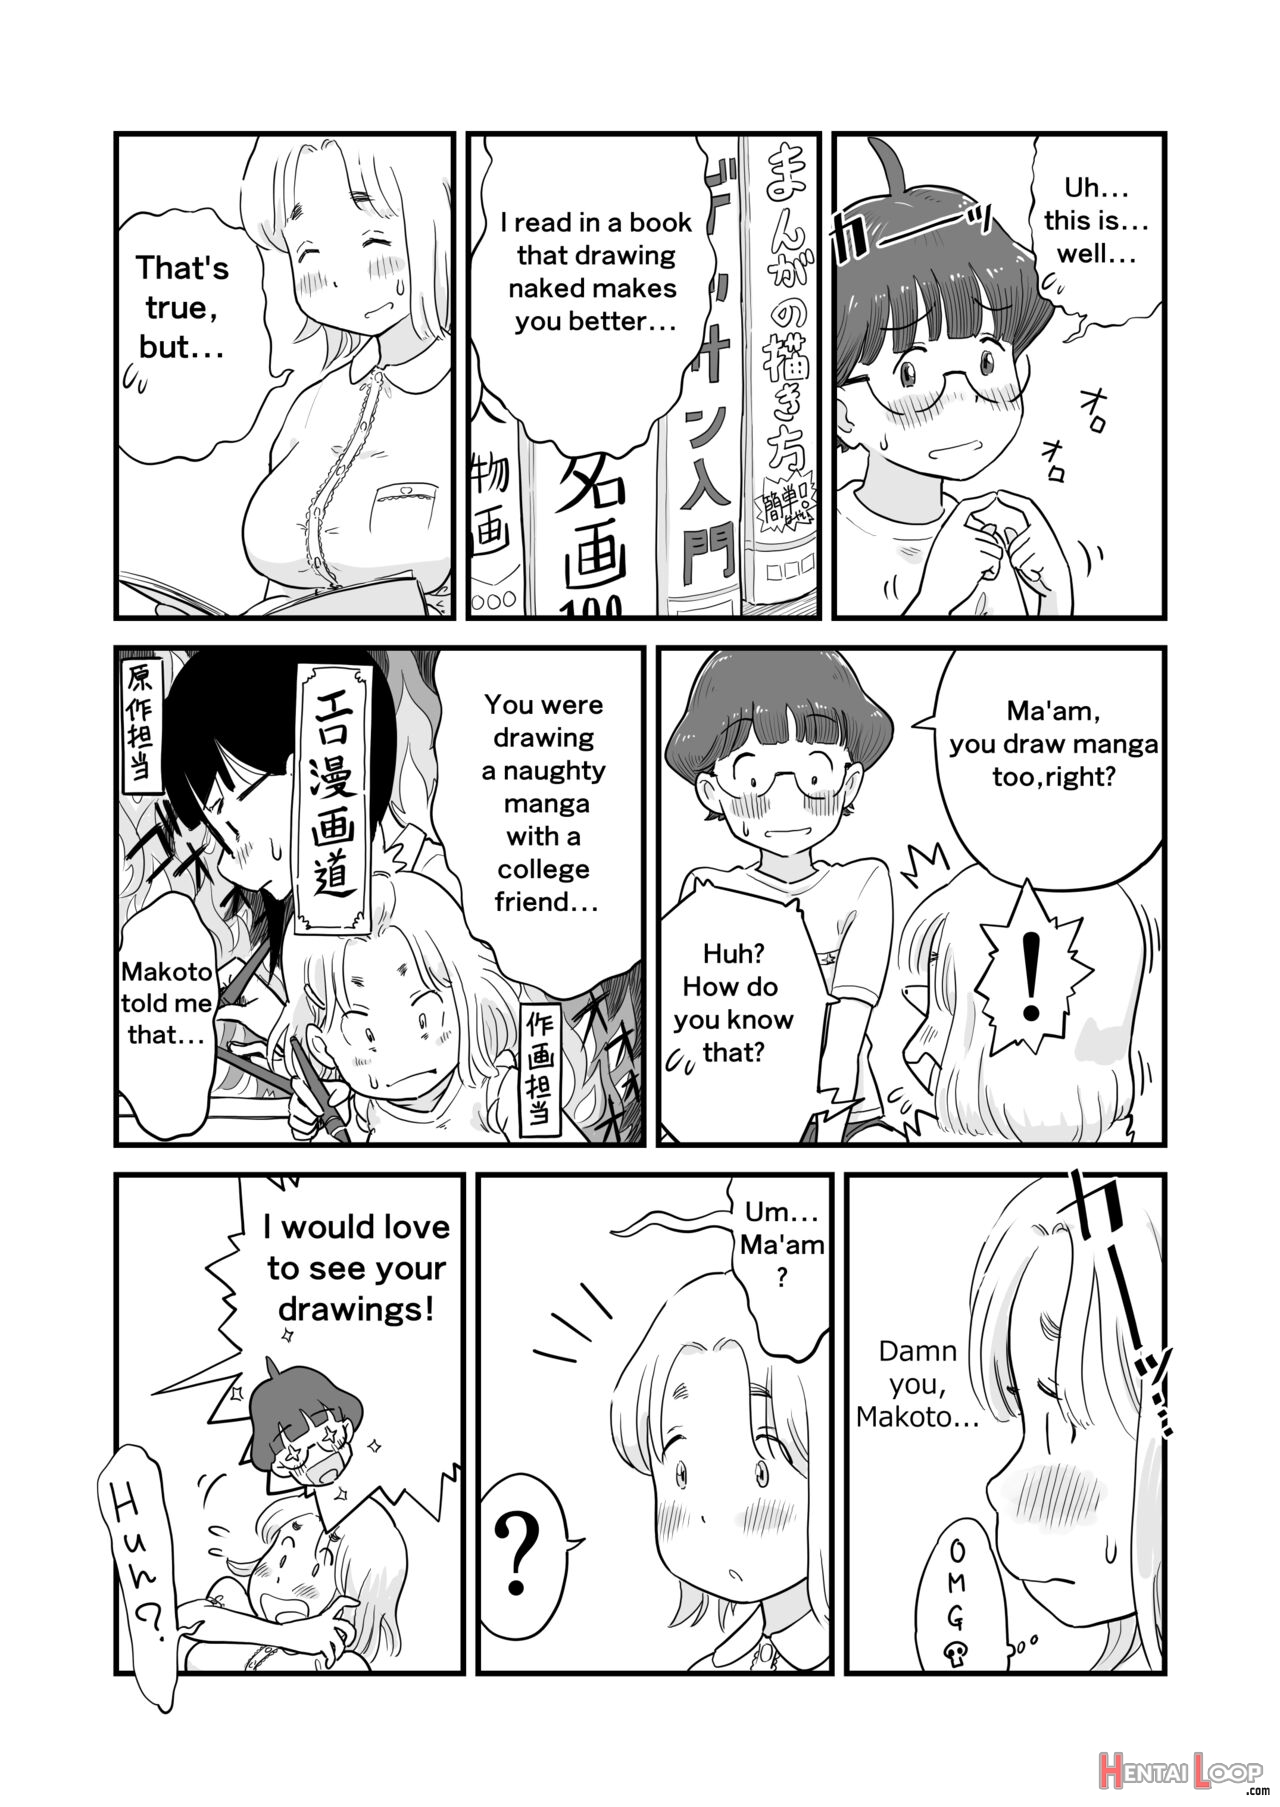 My Sister Is A Doujinshi Artist Of One-shota. page 19